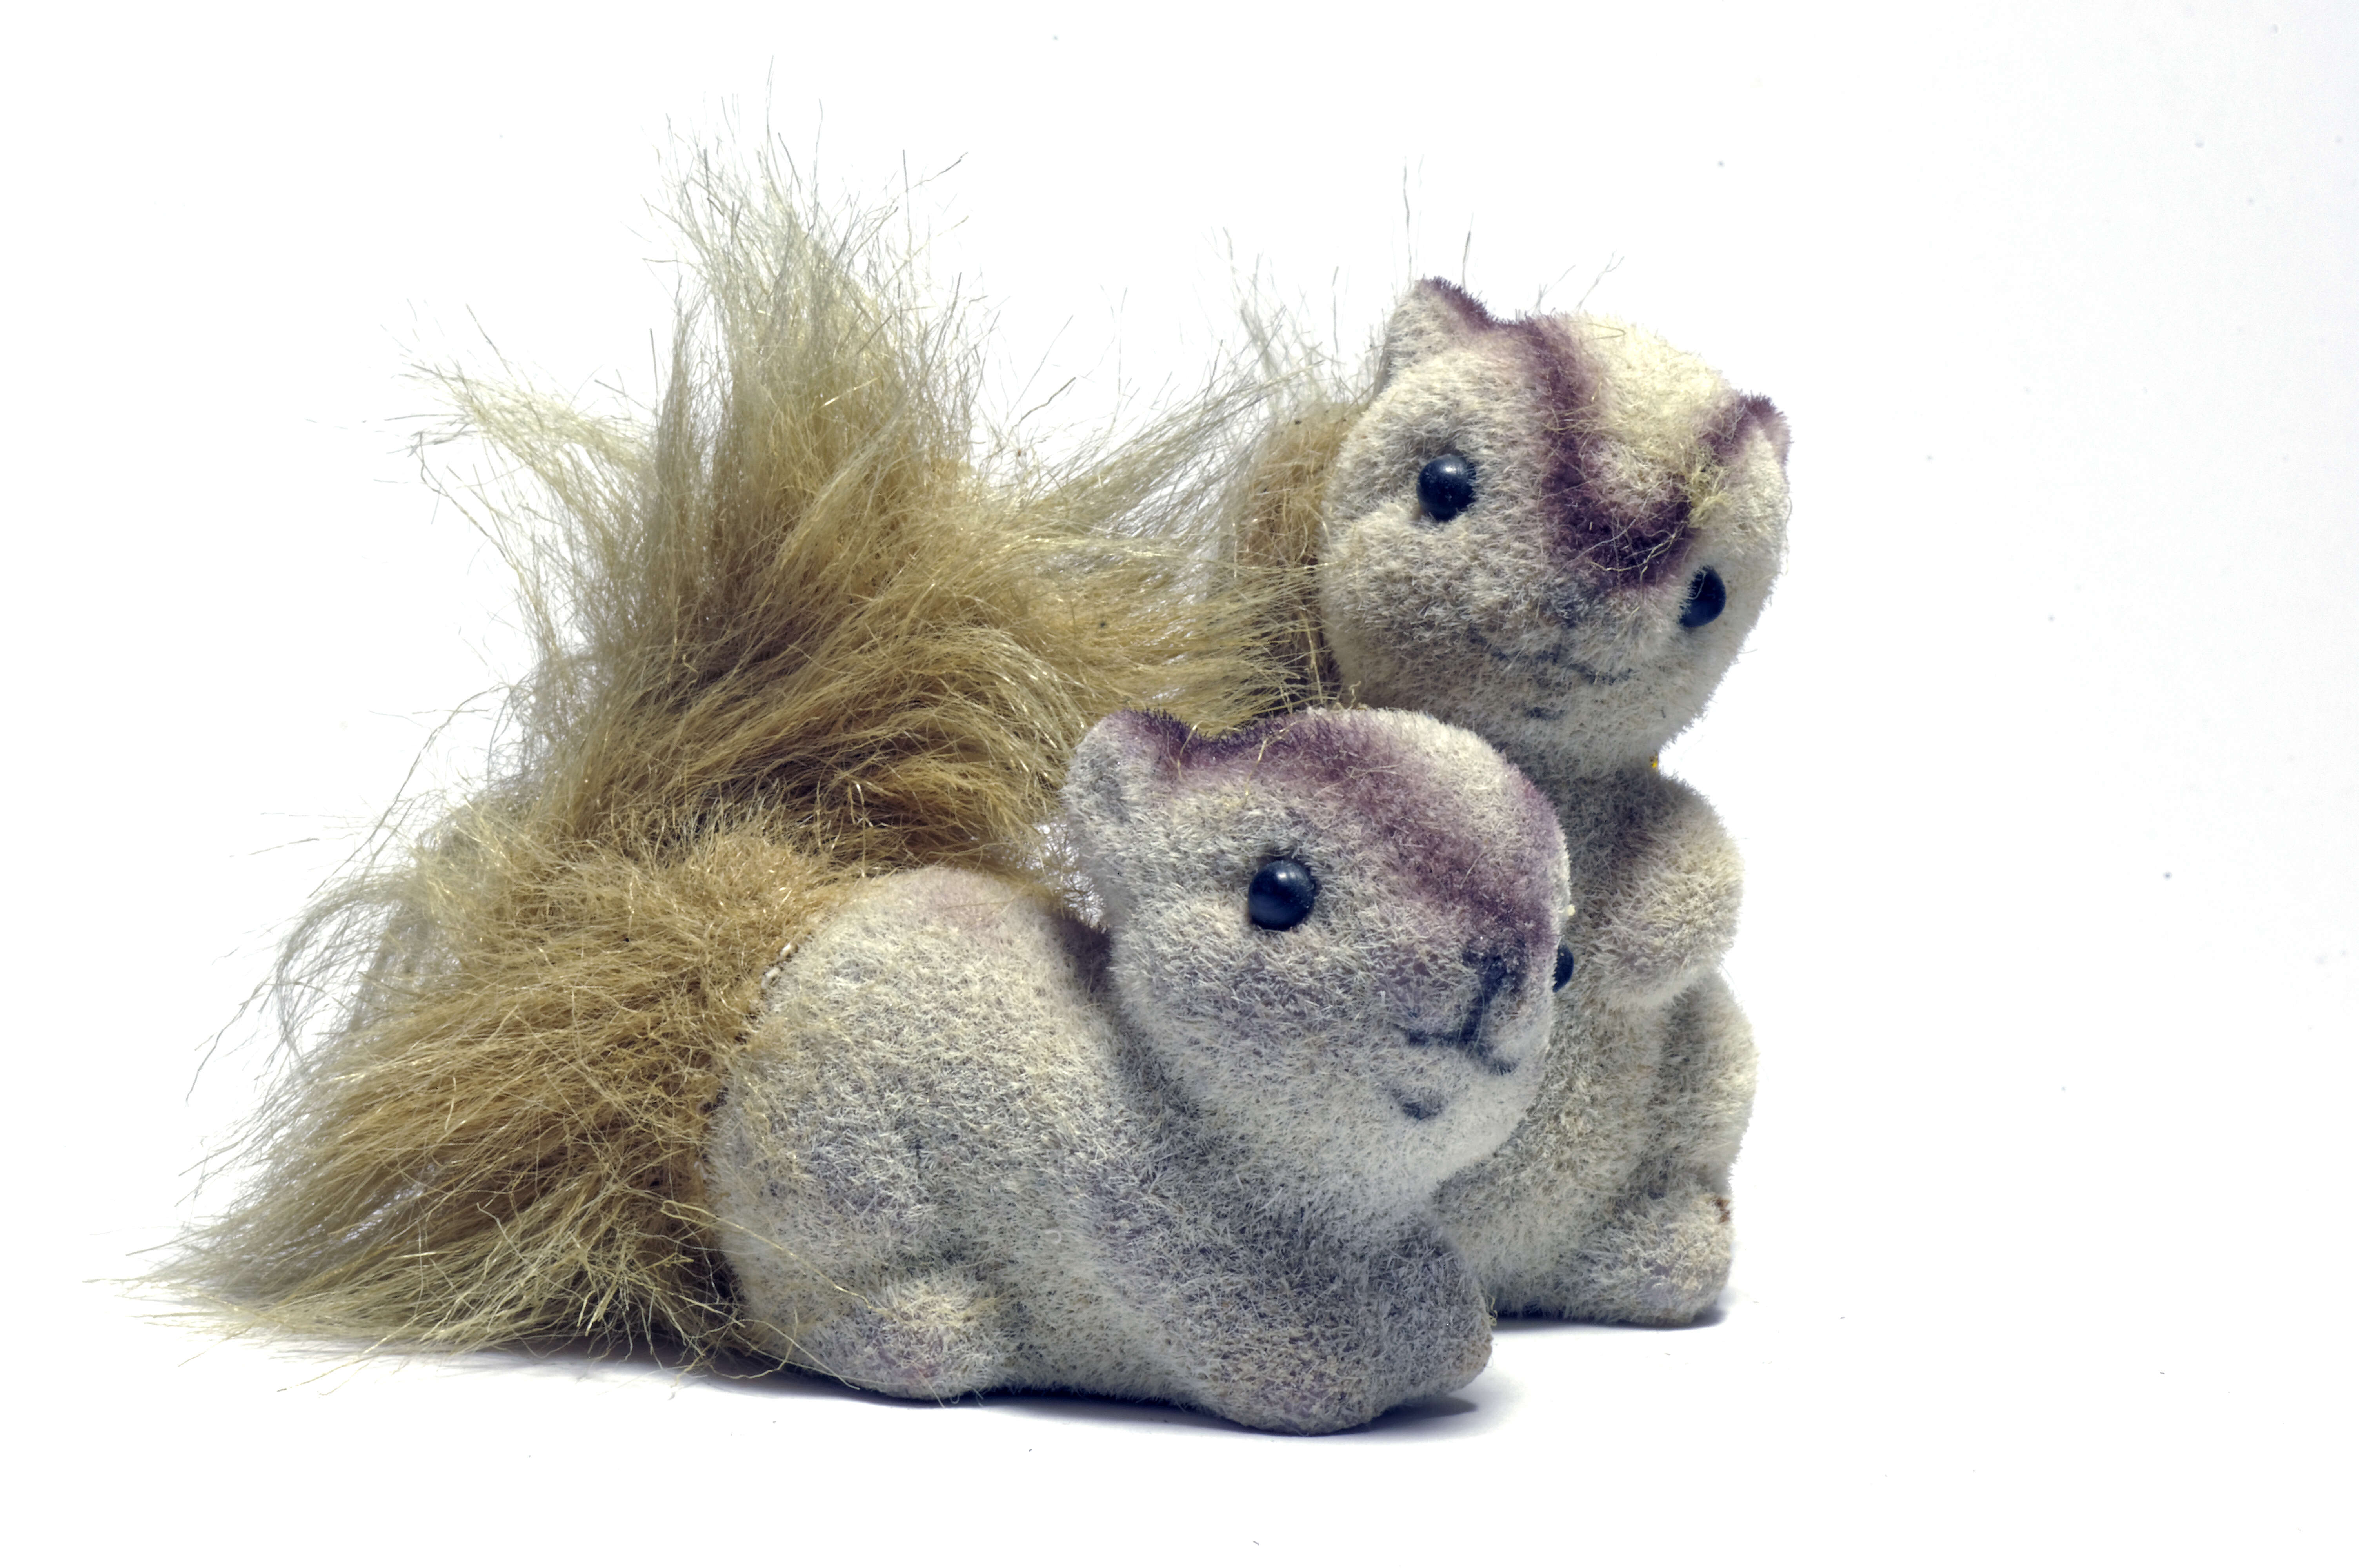 Image of squirrels, dormice, and relatives